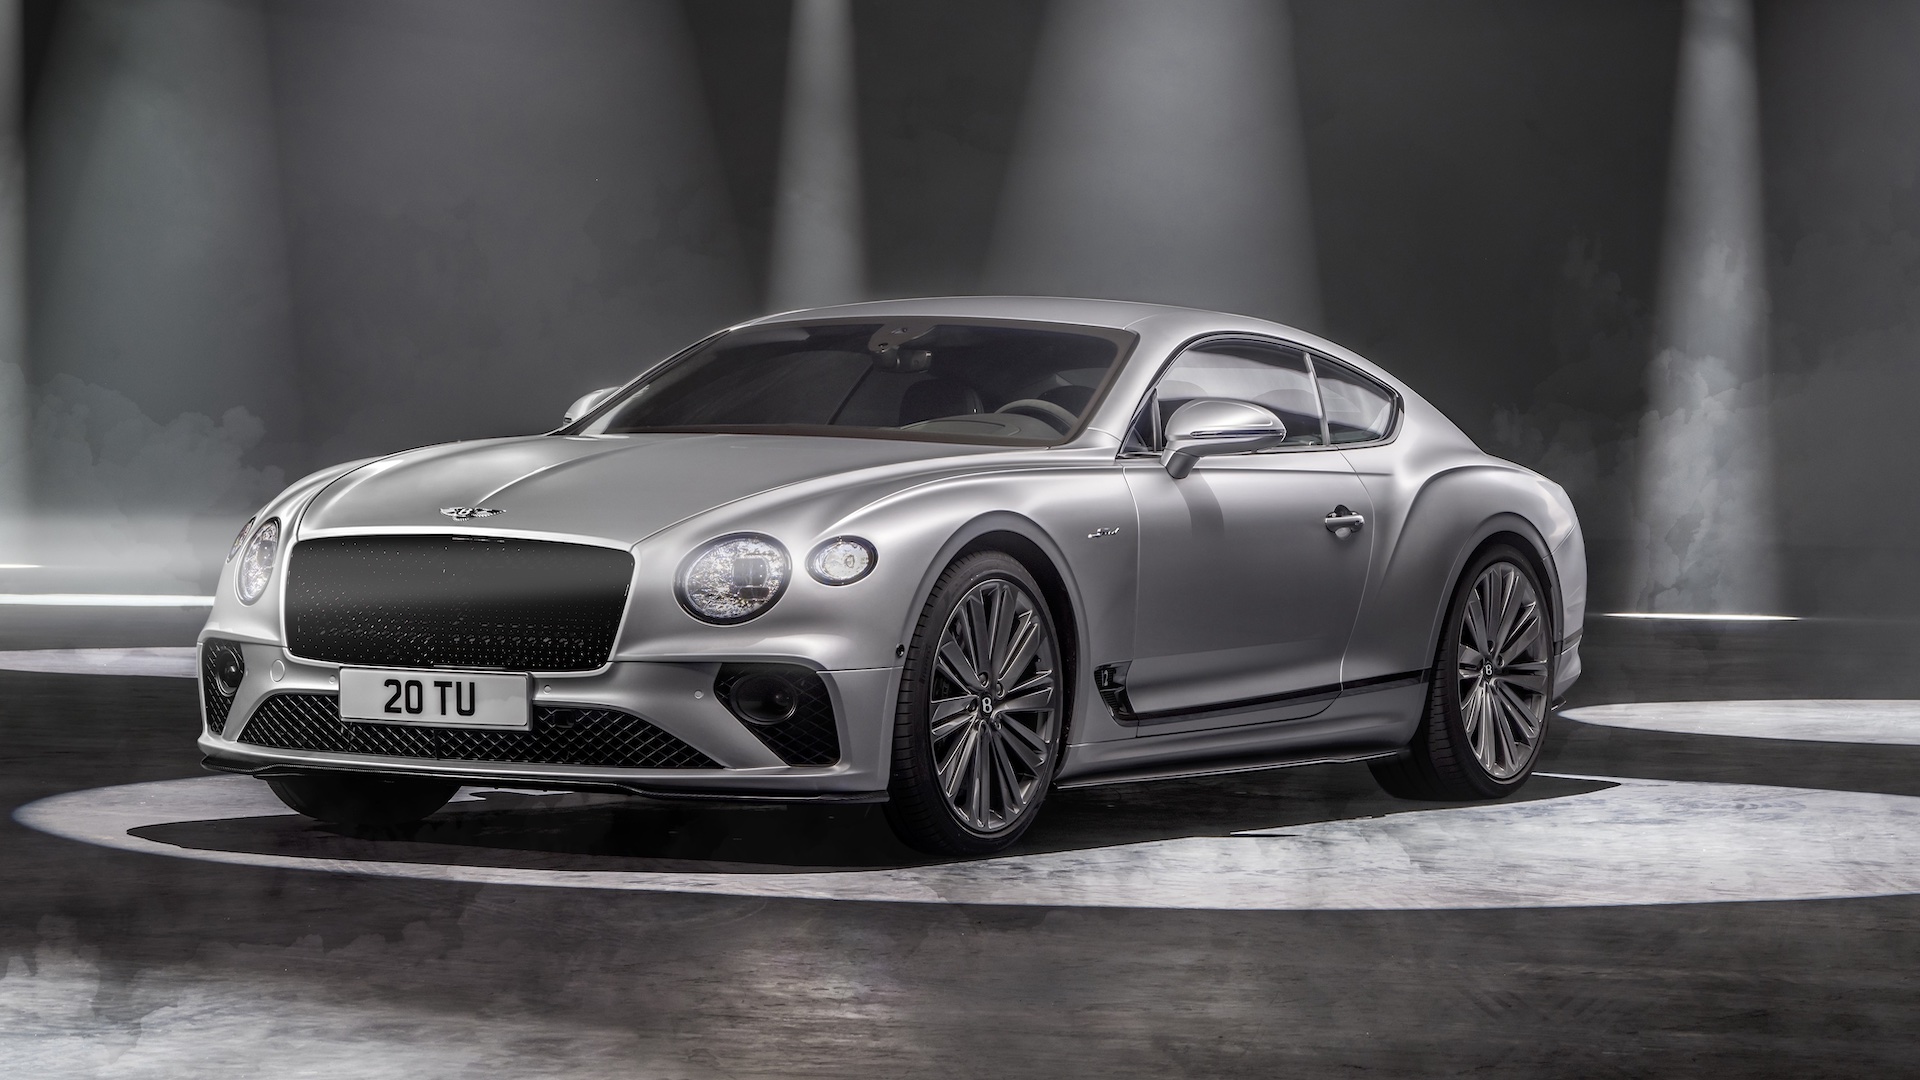 The new Bentley Continental GT Speed Trailer